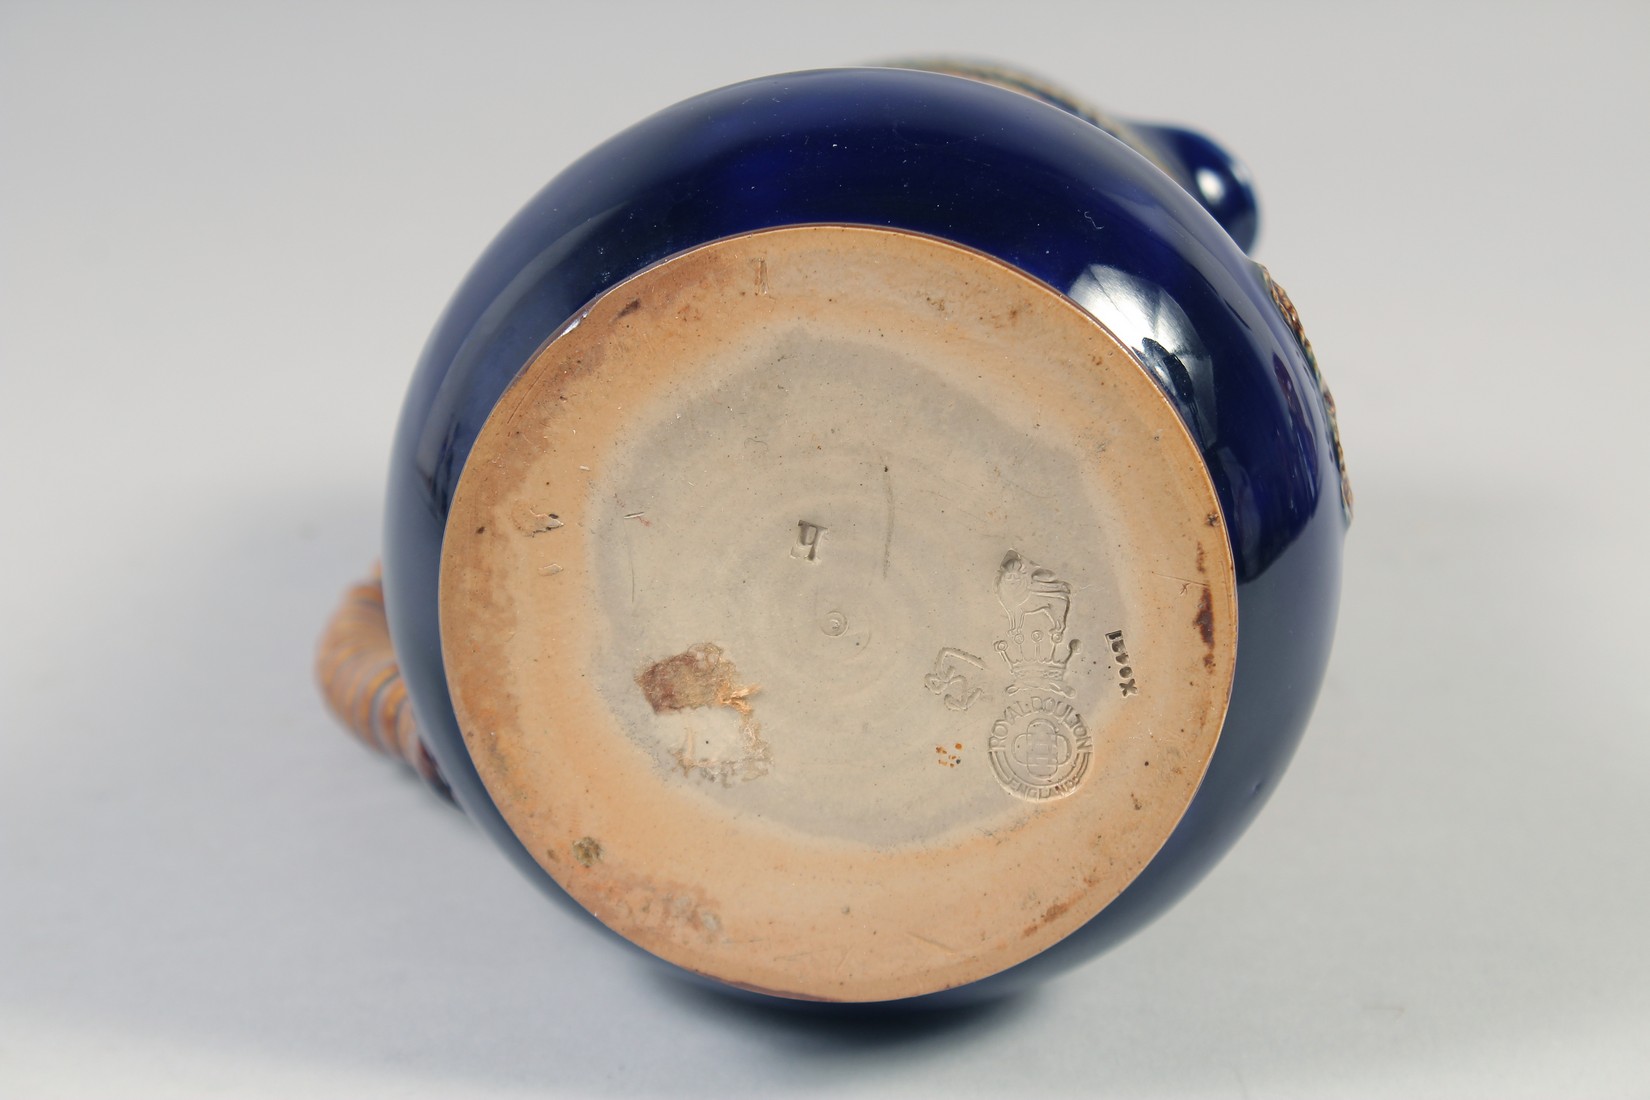 A ROYAL DOULTON STONEWARE JUG, "Lord Nelson born 1758 died 1805", 8". - Image 6 of 7